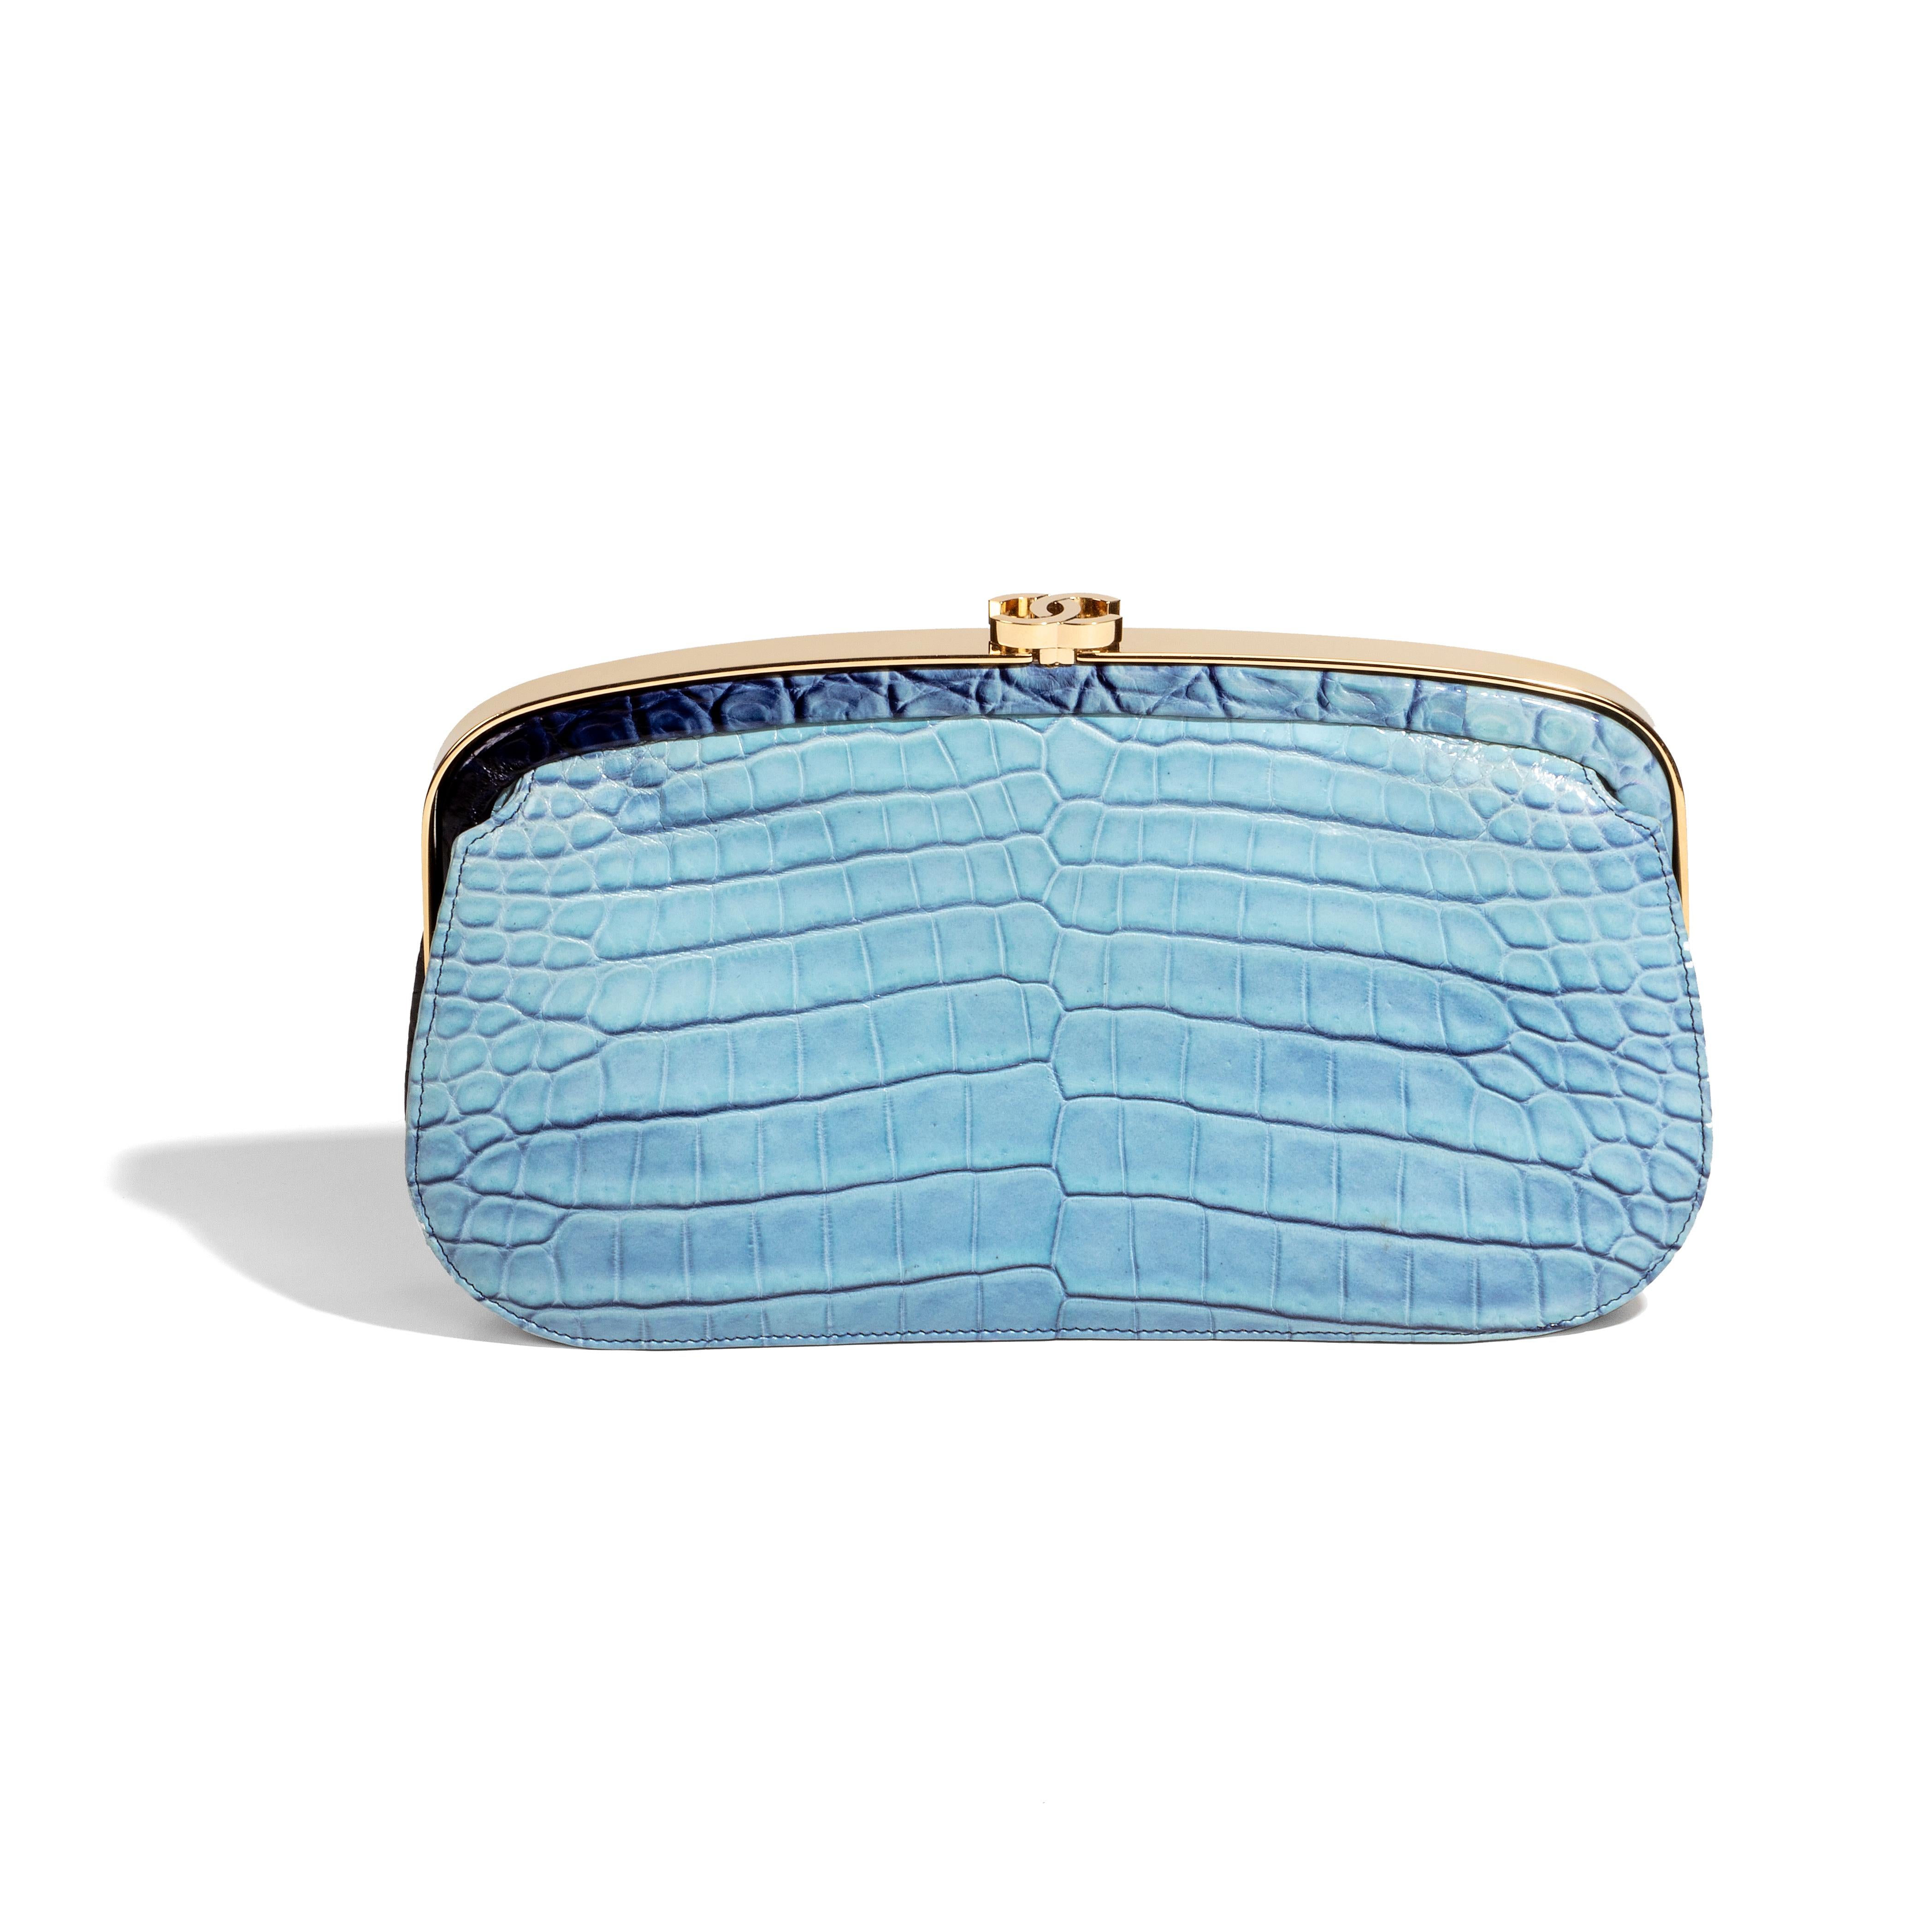 Chanel Blue Ombre Leather Clutch 2